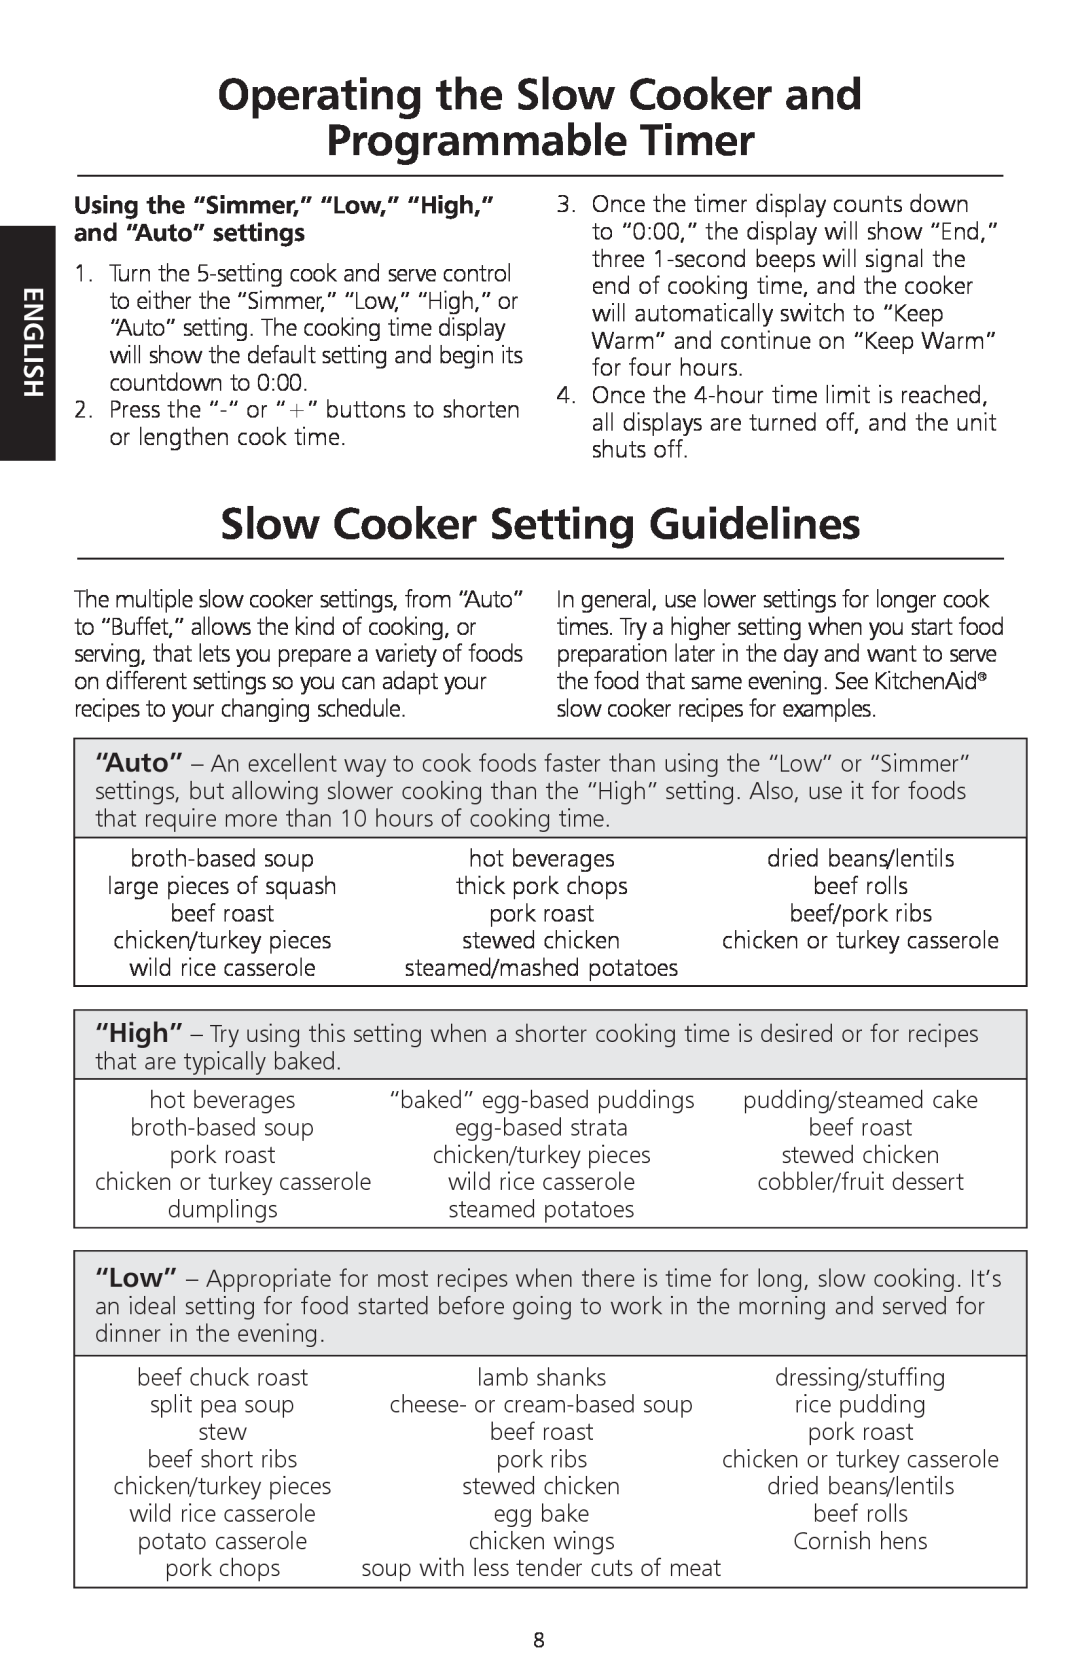 KitchenAid KSC700 manual Slow Cooker Setting Guidelines, Operating the Slow Cooker and Programmable Timer, English 